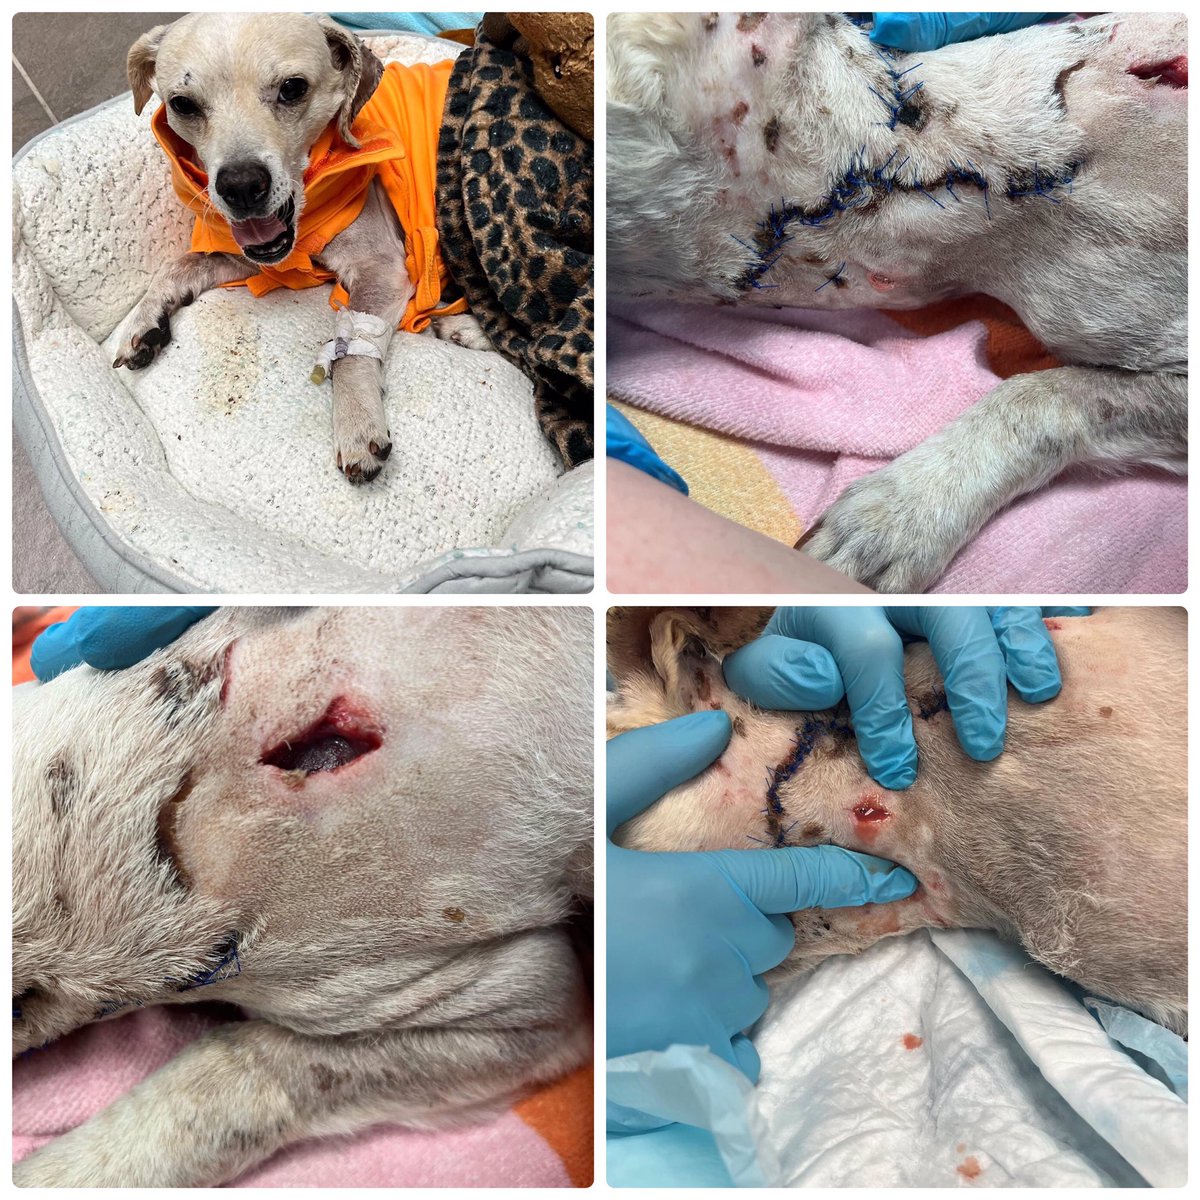 🙏ARIES PUPDATE ⚠️Sensitive Content⚠️ He had a 2nd surgery under 1 of the suture sites an abscess formed & burst, 1 incision was made on the neck & 1 on the neck 2 allow drainage Still fighting the🩸infection that requires antibiotics by IV & bandages changed every 12hrs